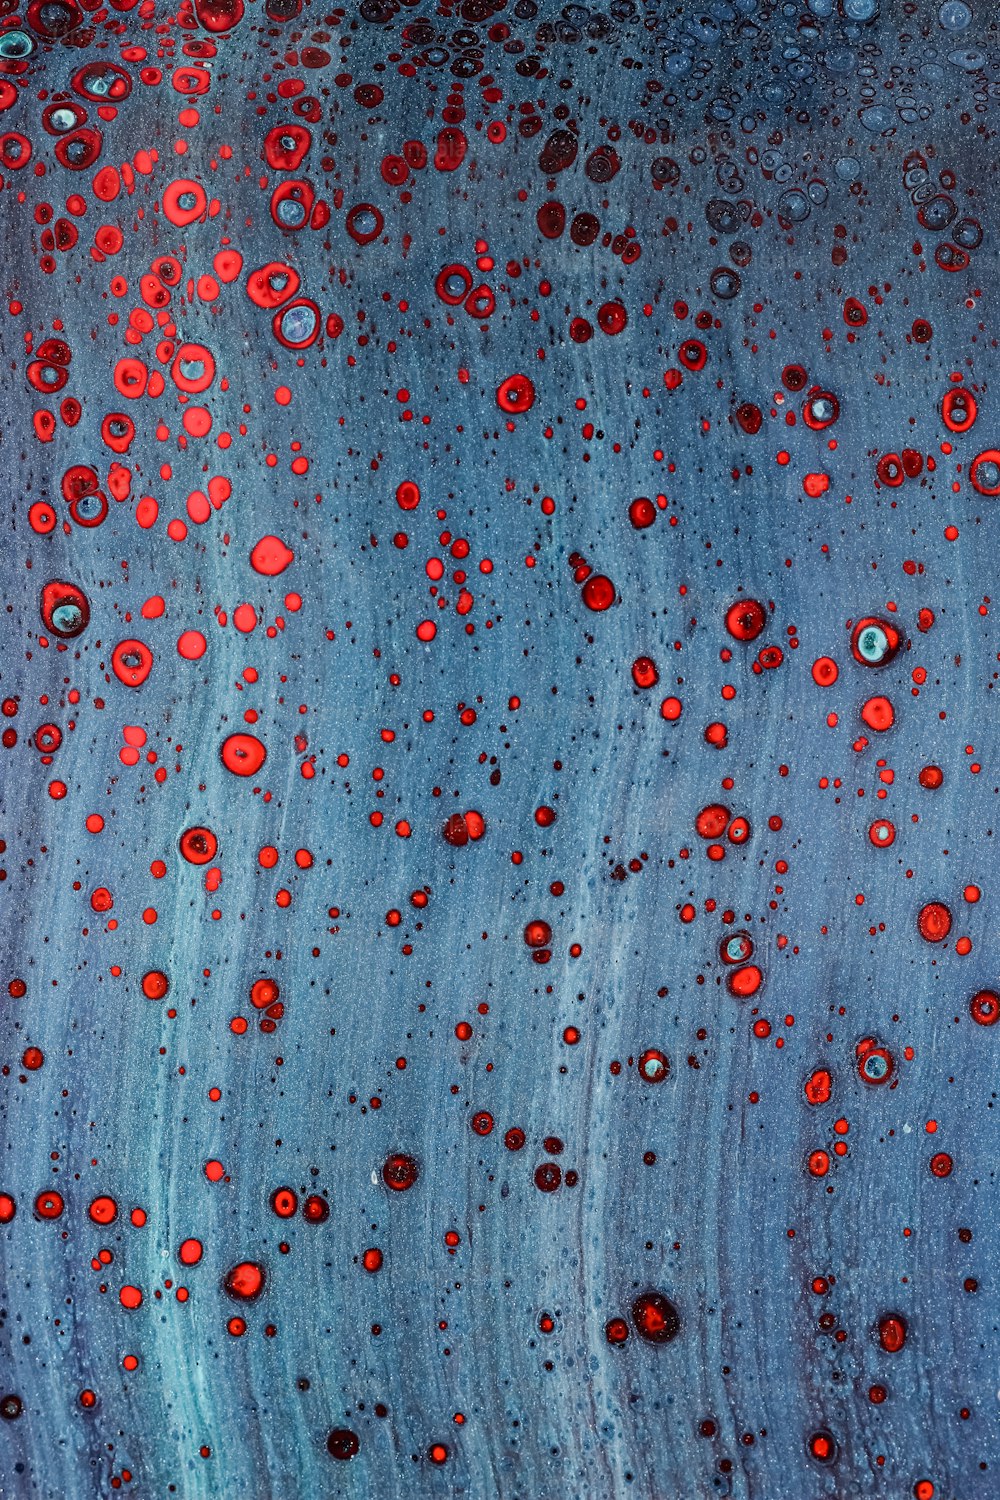 a close up of a blue surface with red dots